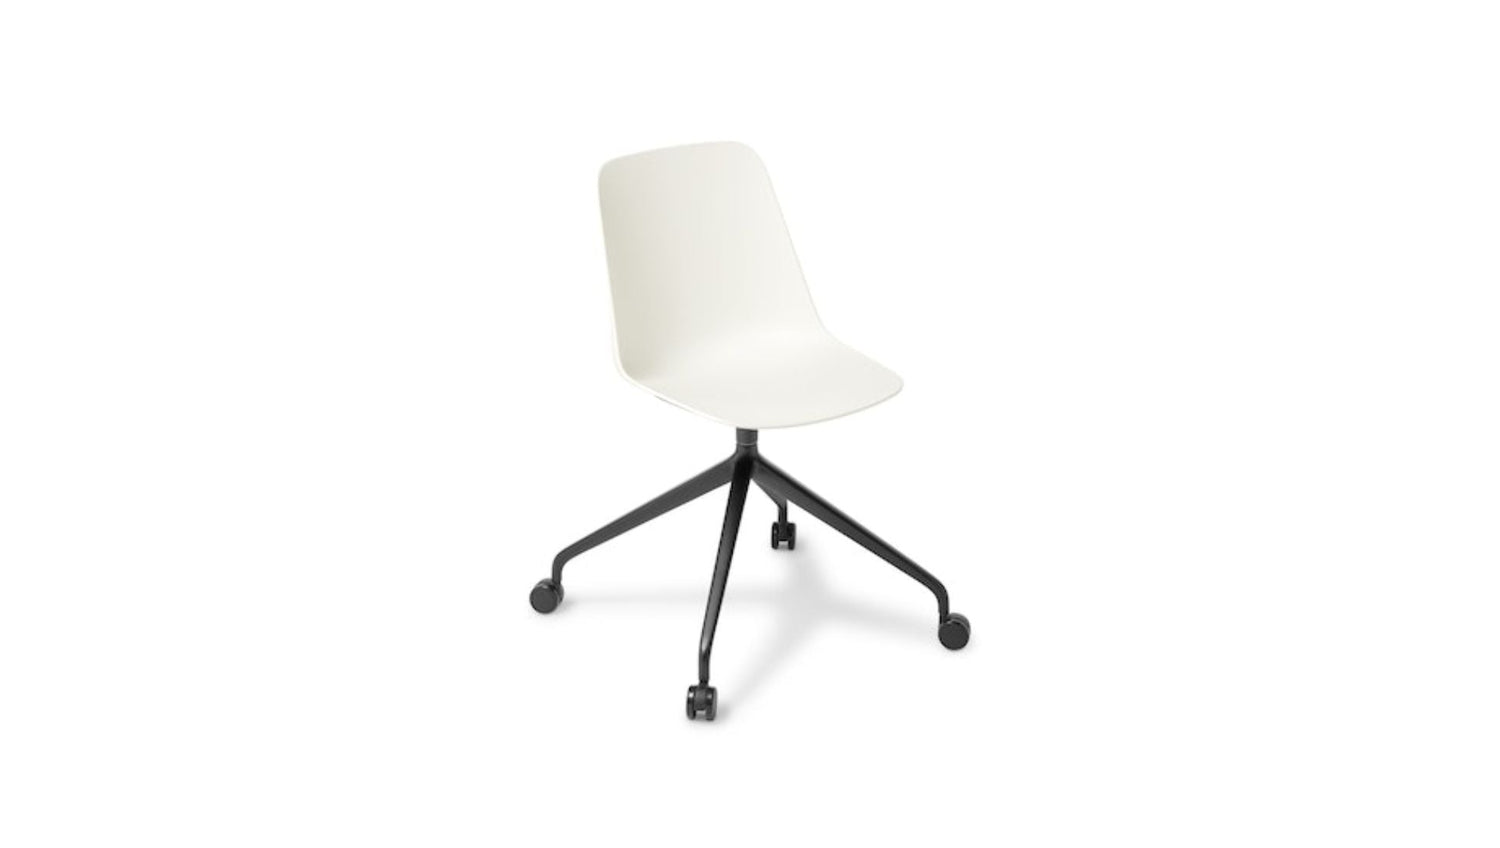 Seating Standard Seat / 4 Star Black Powder coated Castor base / White Max Chair